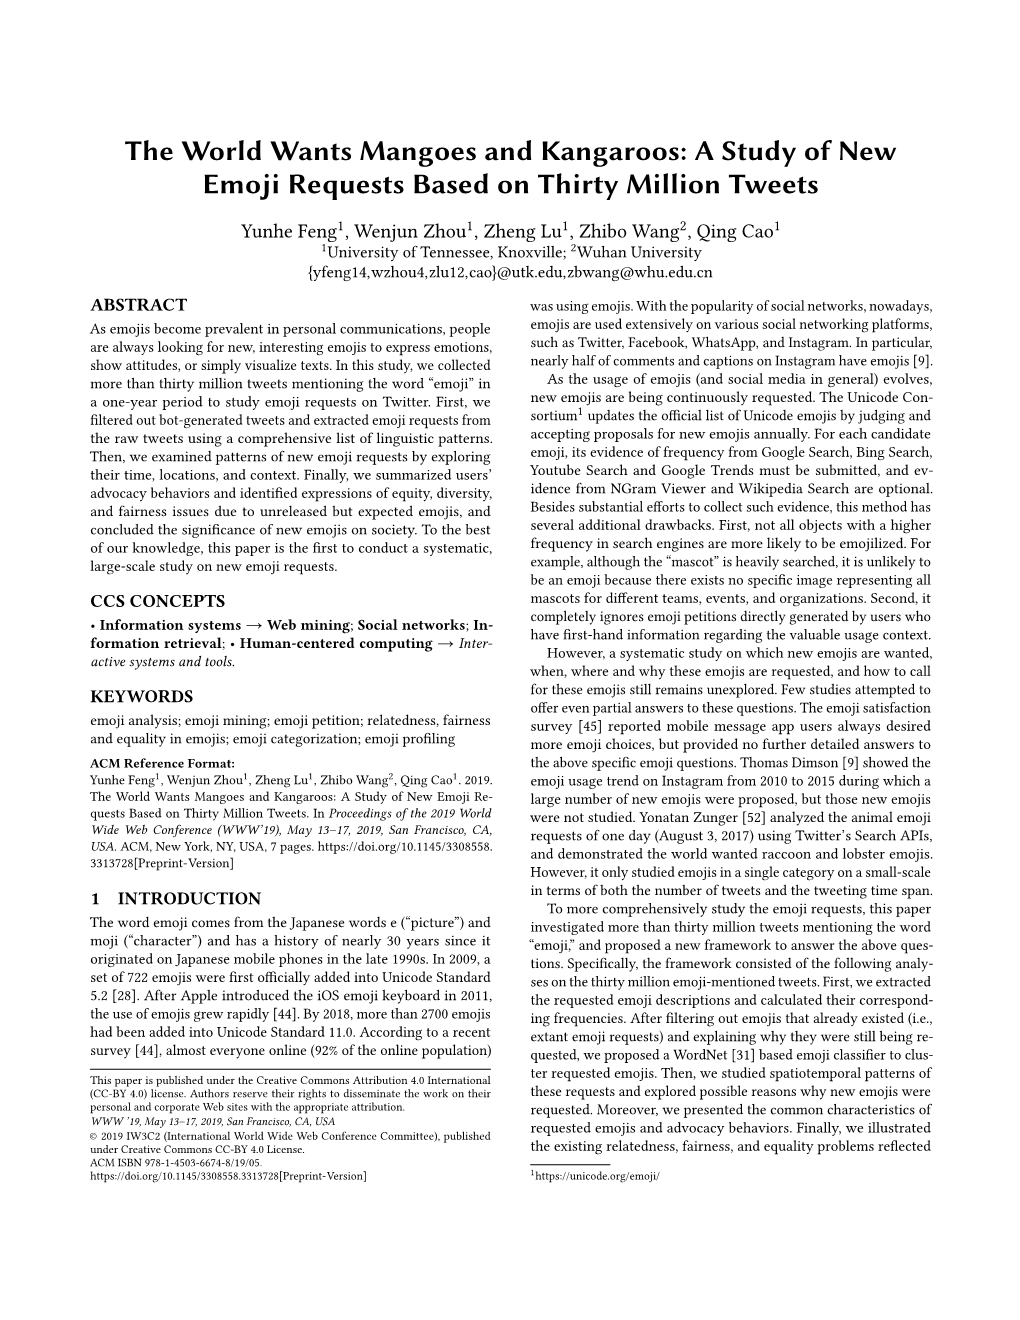 A Study of New Emoji Requests Based on Thirty Million Tweets